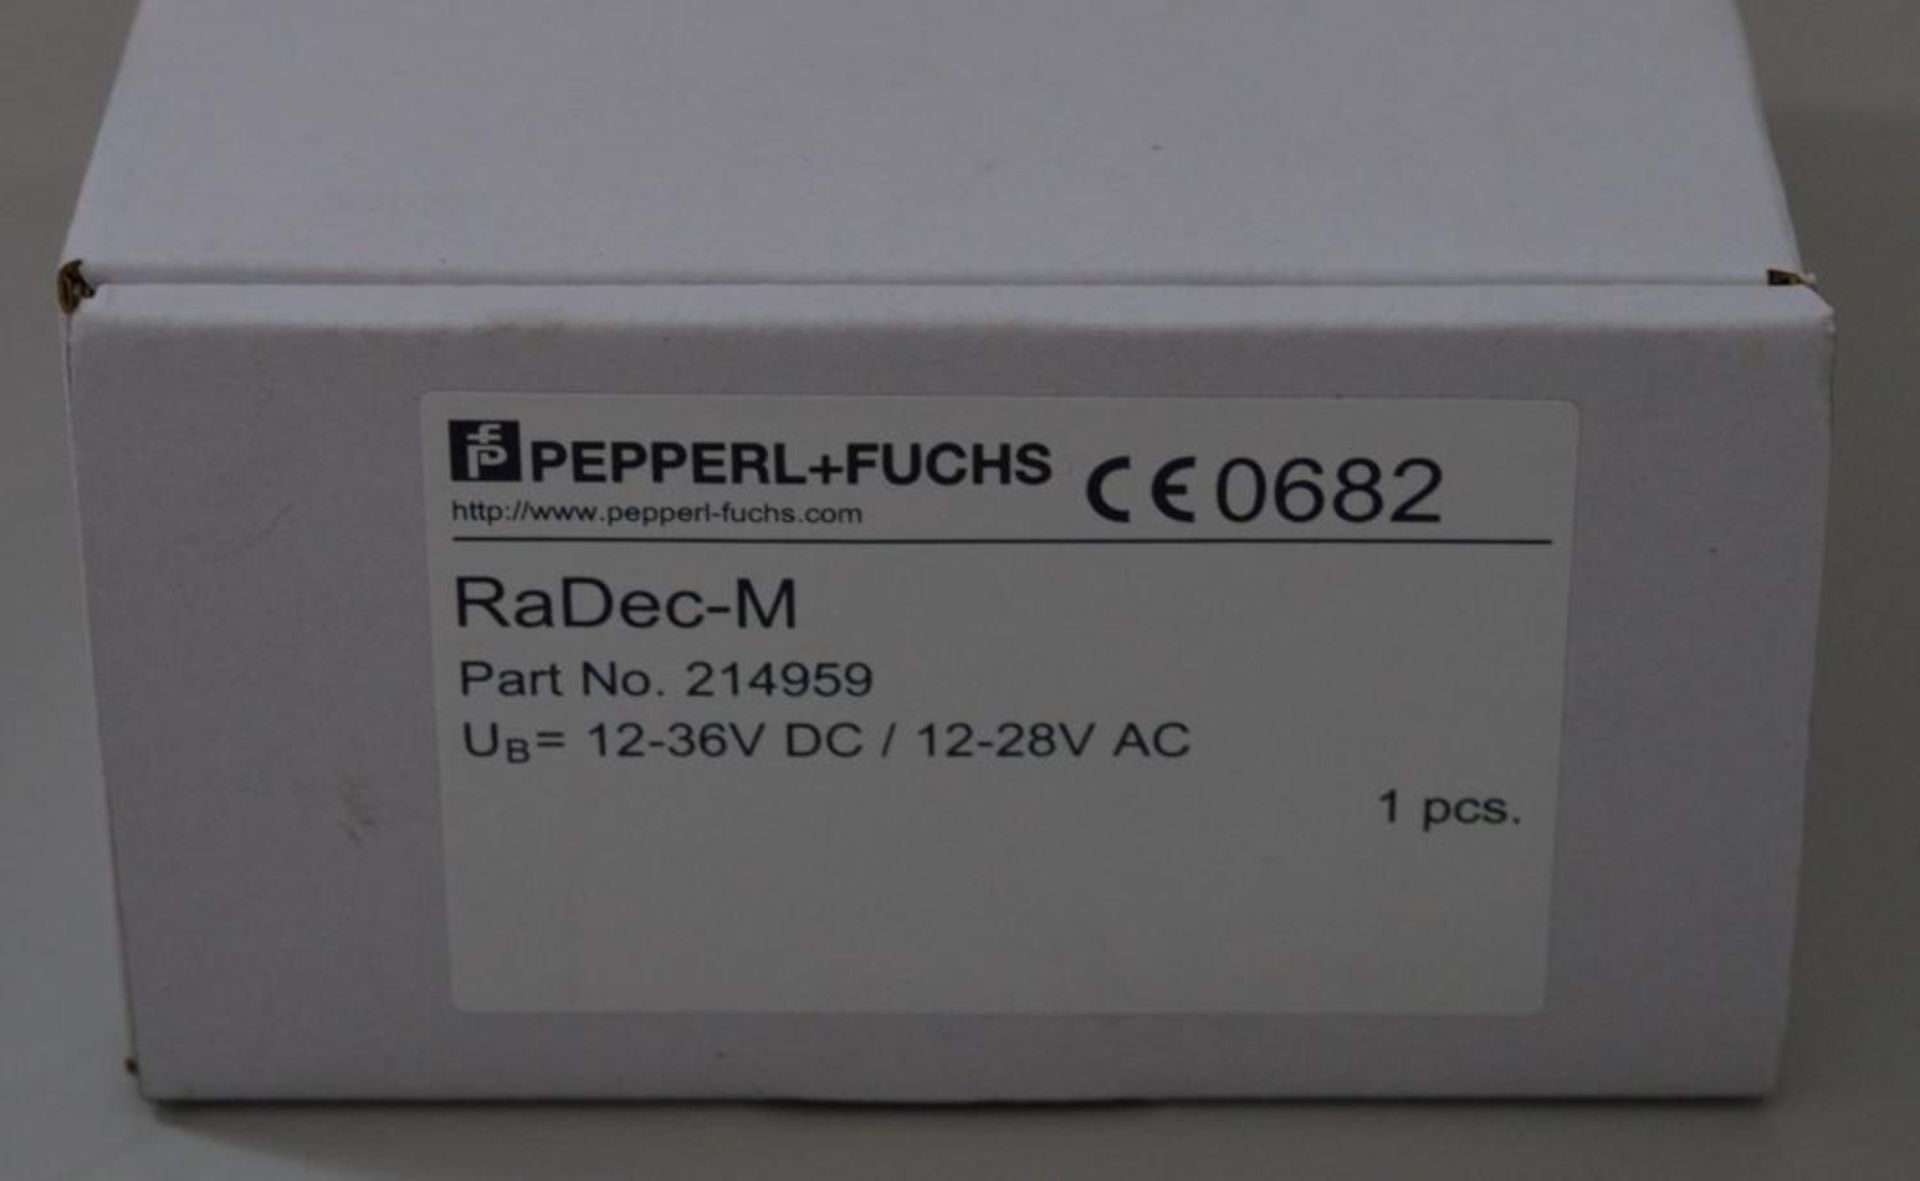 1 x Pepperl & Fuchs RaDec-M Radar Motion Detector - Suitable For Automatic Doors - 24Ghz - Image 4 of 5